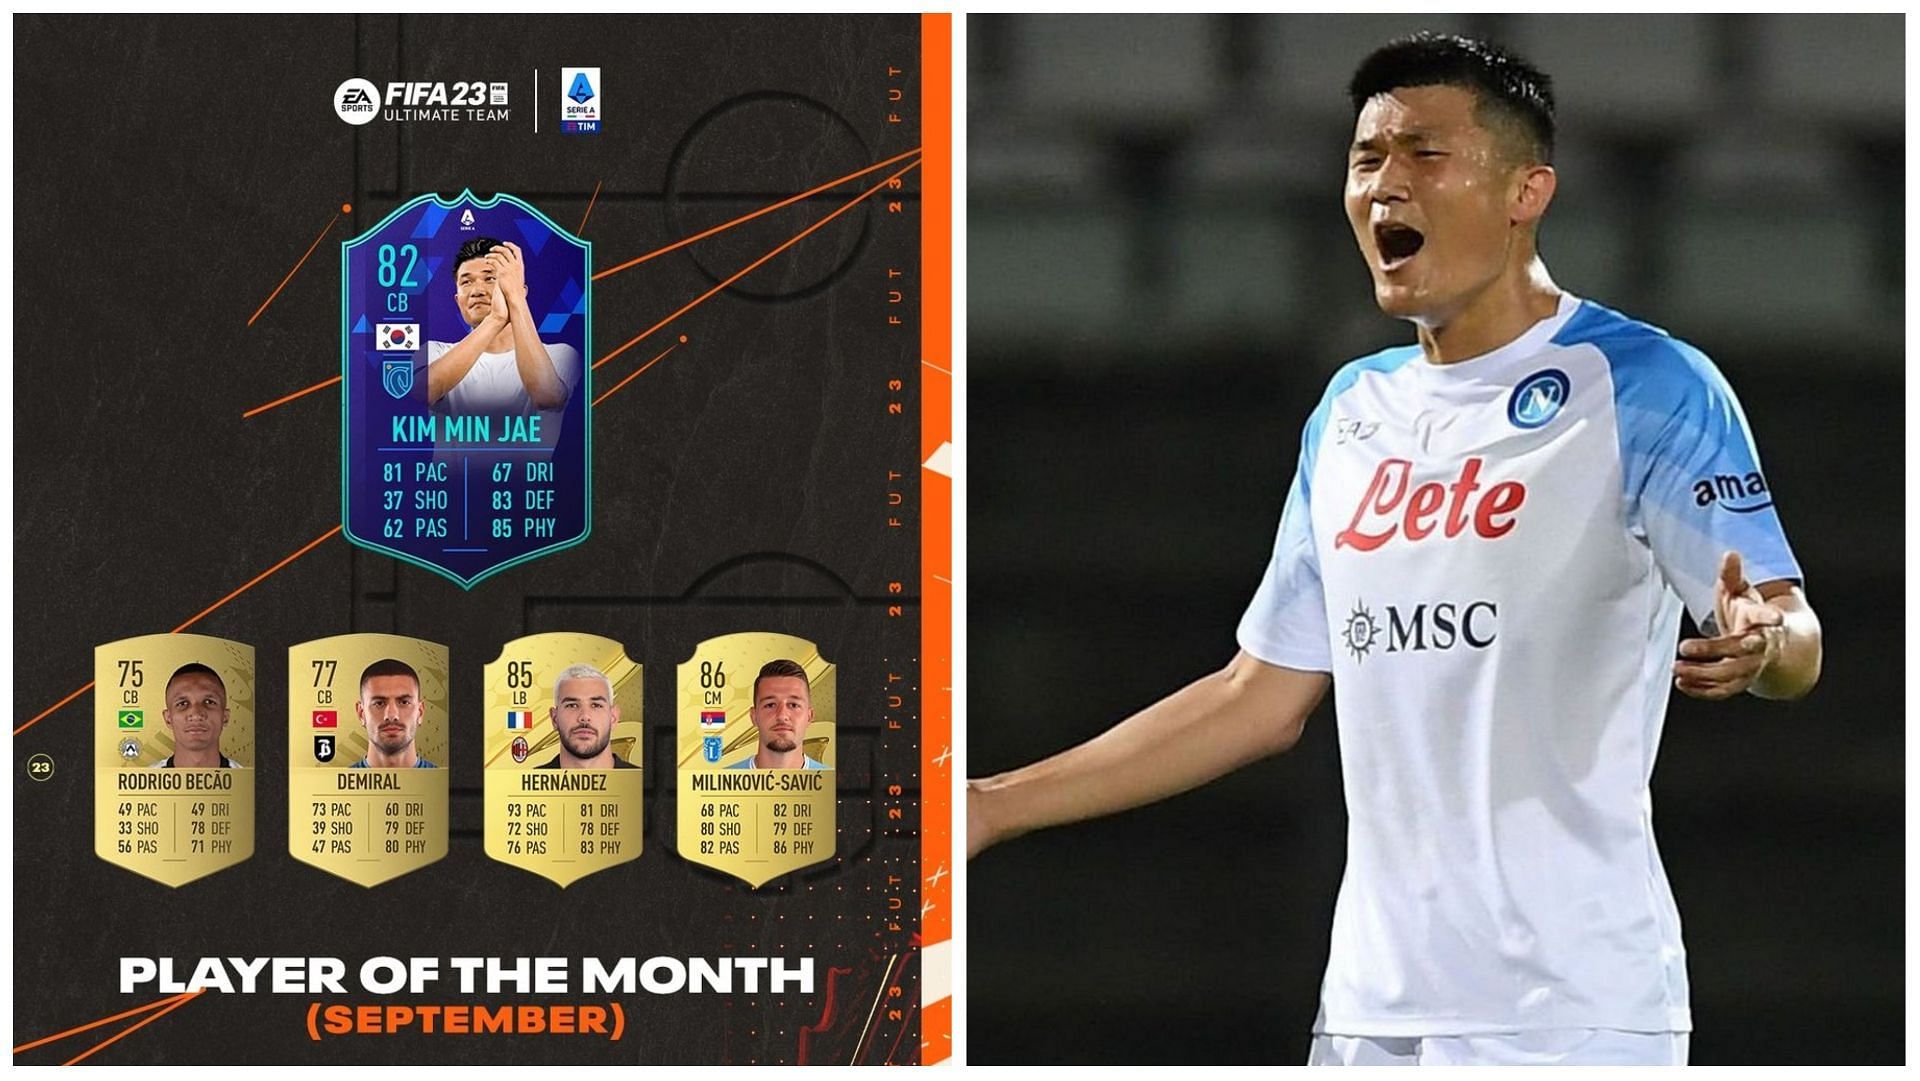 Kim Min Jae has won the Serie A POTM award for September (Images via EA Sports and Getty Images)